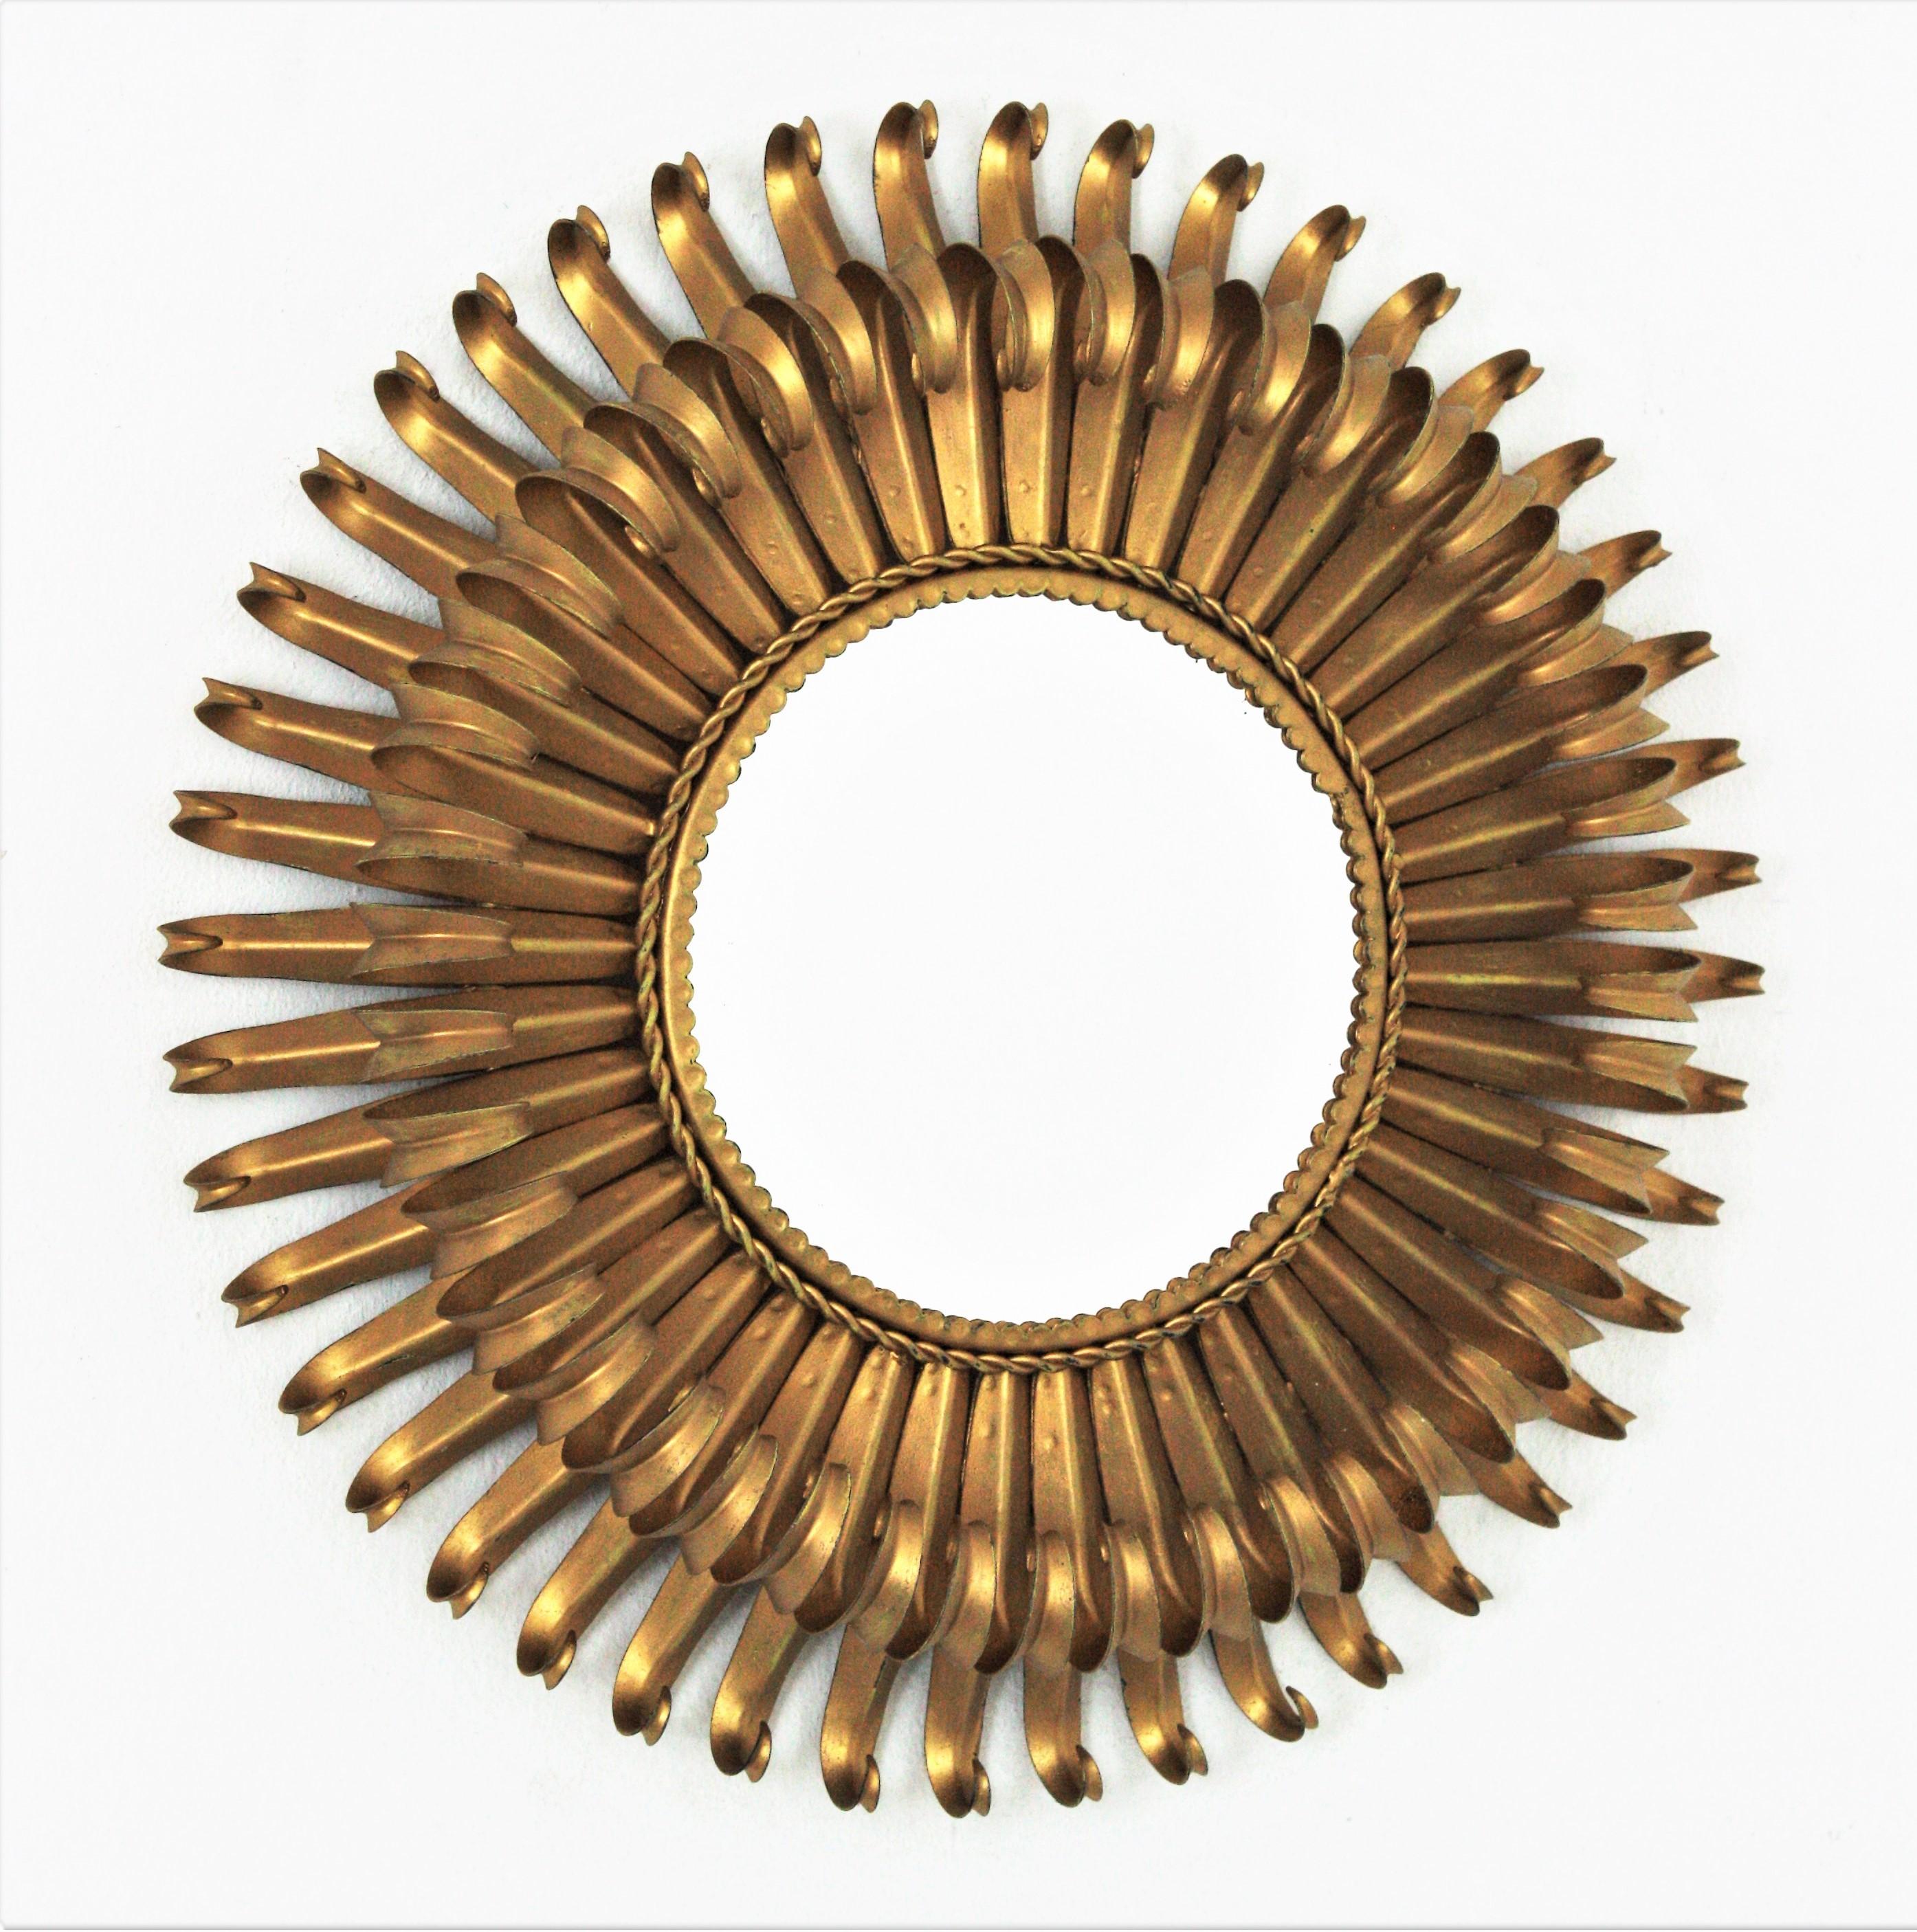 Eye-catching double layered eyelash gilt iron sunburst mirror, France, 1950s
The frame is made by a double layer of curved beams in eyelash shape.
It will be a nice midcentury addition wherever you place it. Beautiful alone but gorgeous as a part